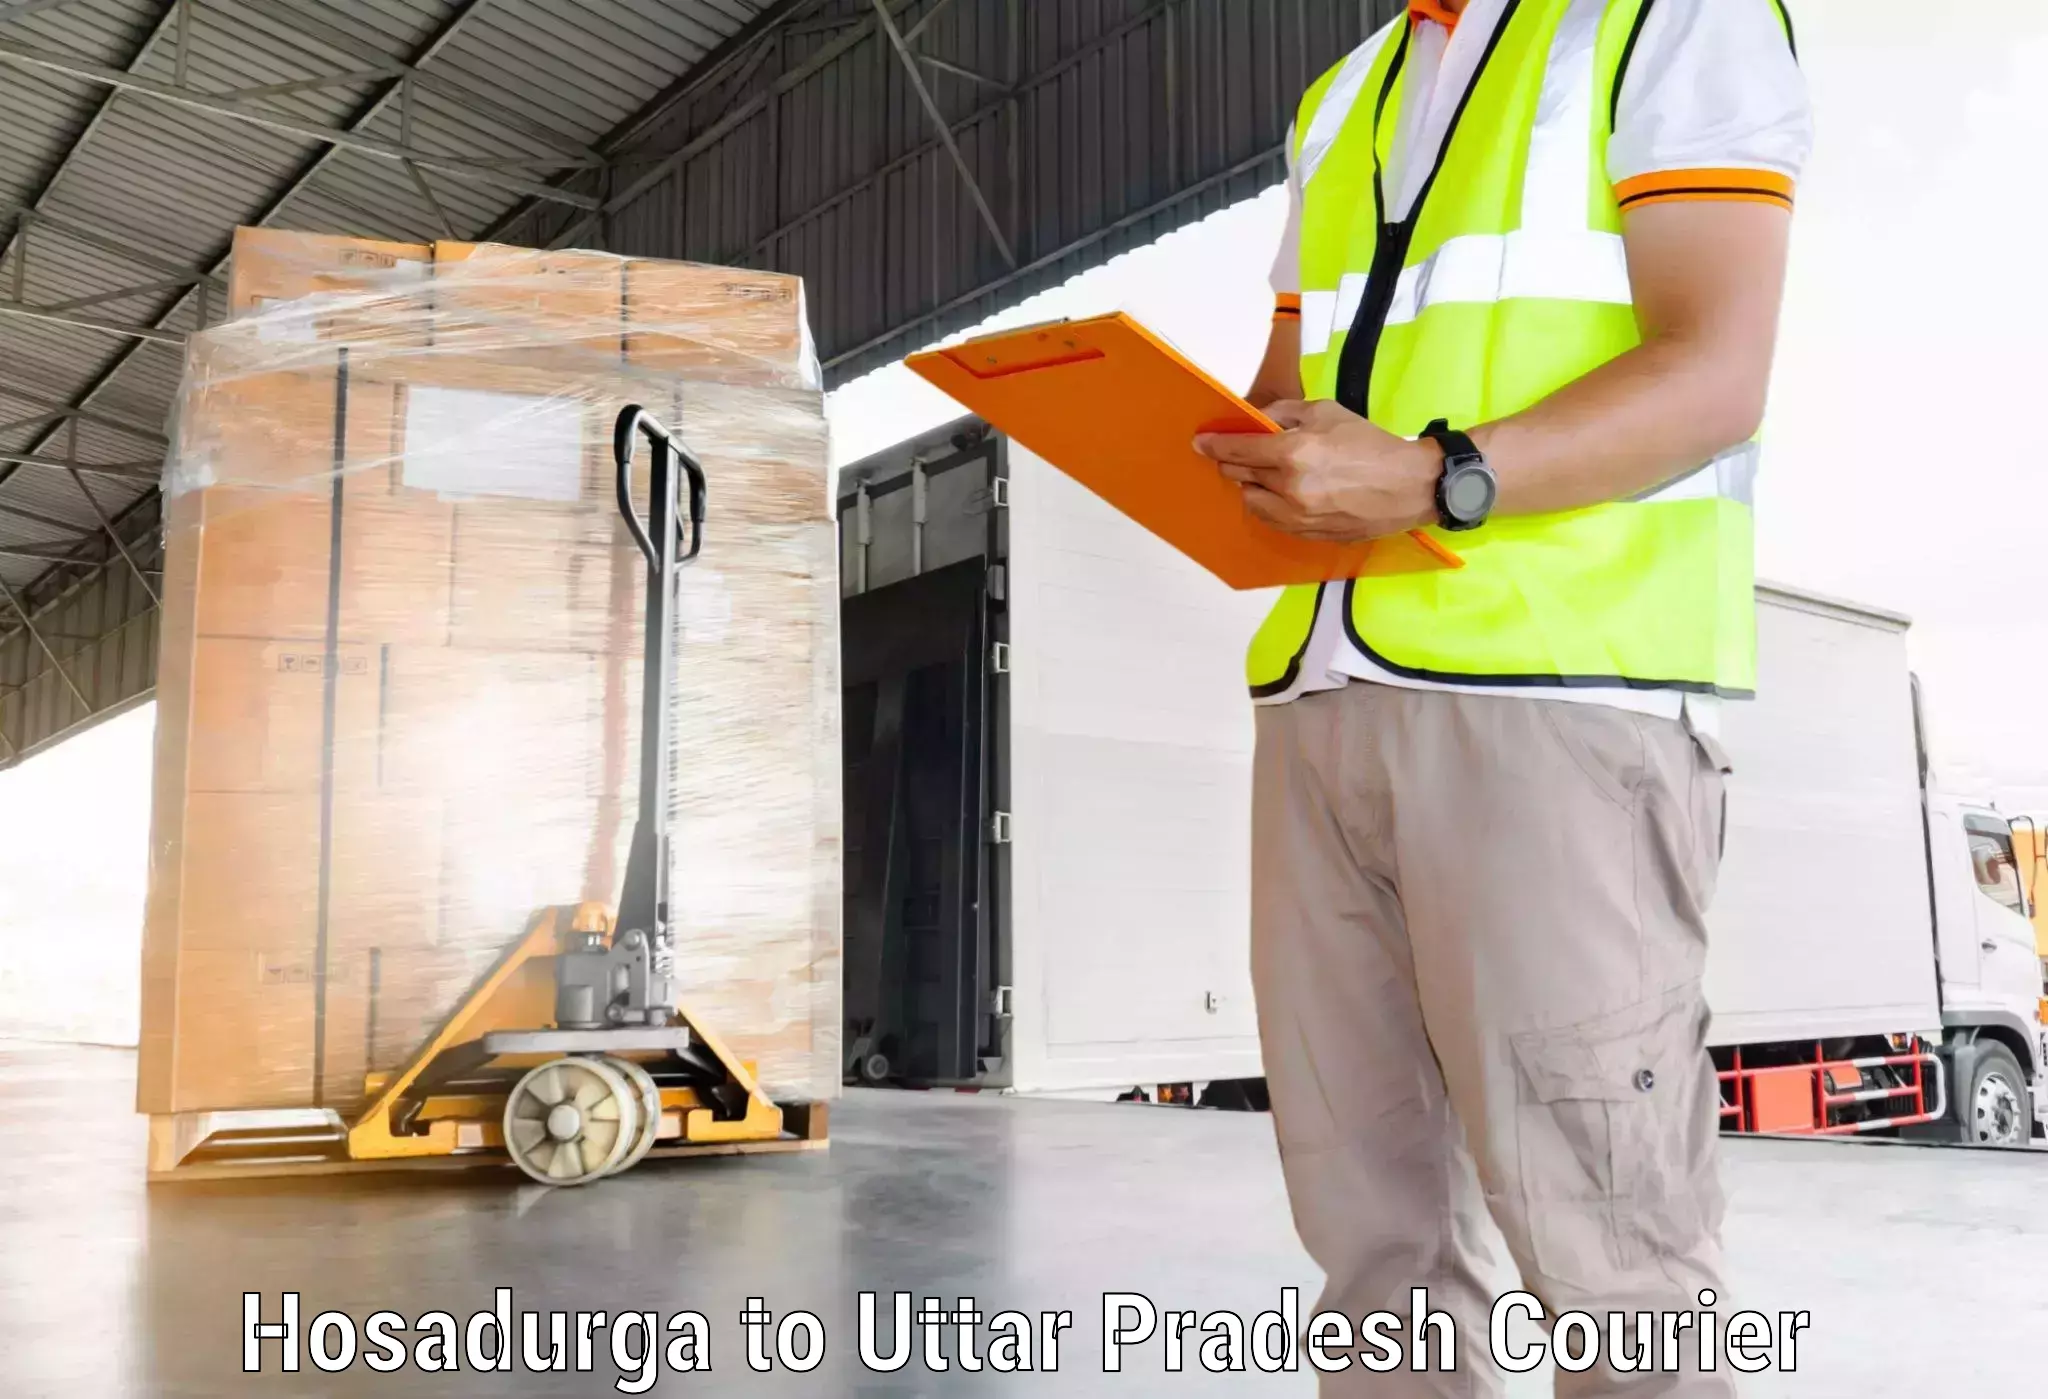 State-of-the-art courier technology Hosadurga to Ghazipur